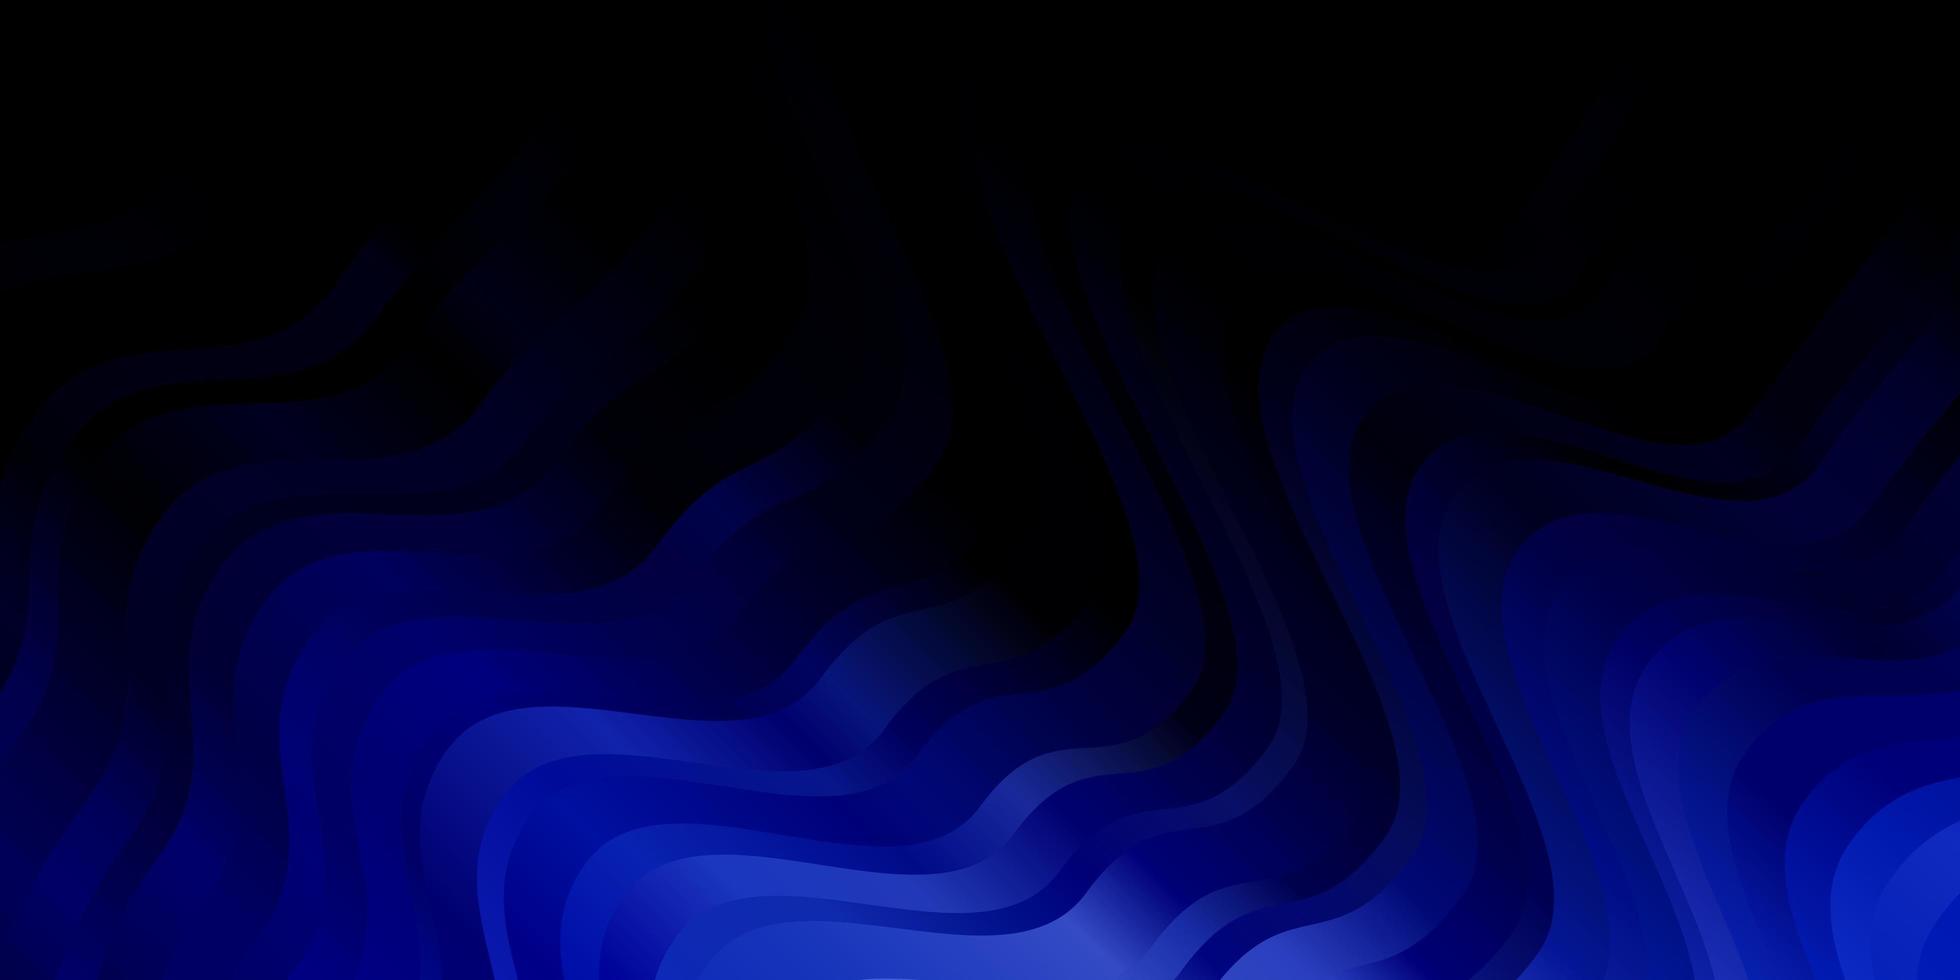 Dark blue template with lines. vector